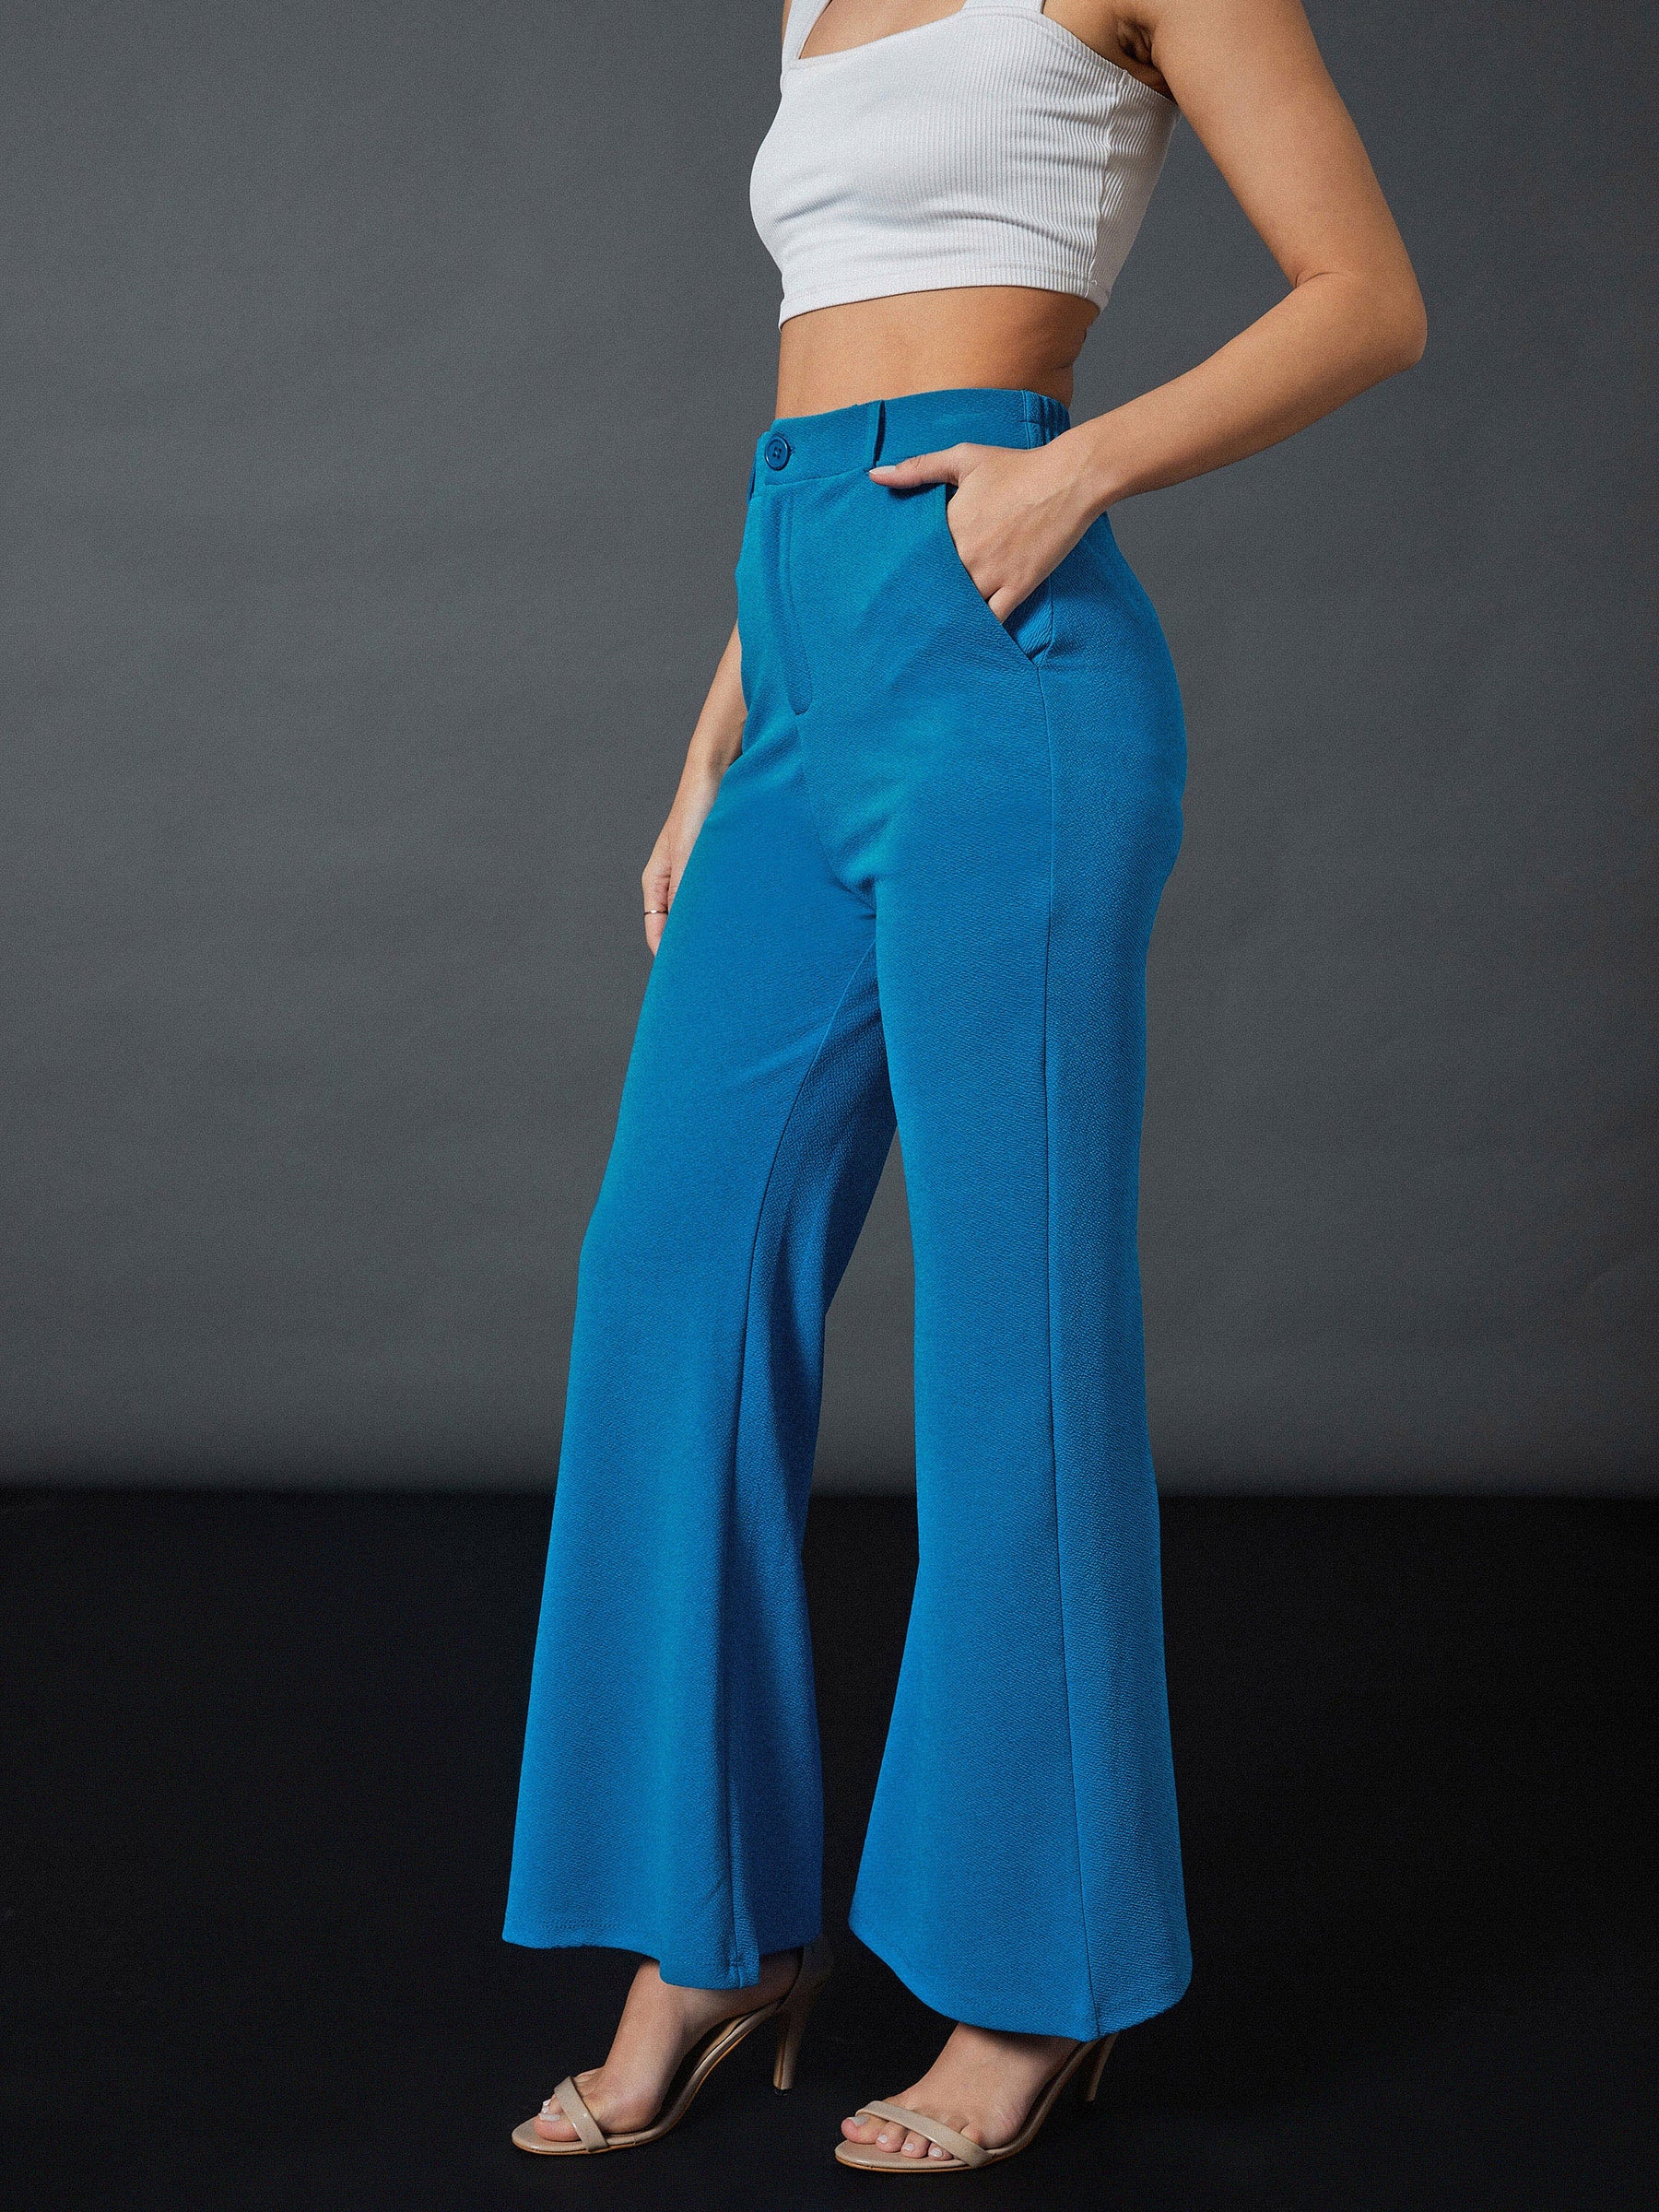 Women Turquoise Blue Trousers - Buy Women Turquoise Blue Trousers